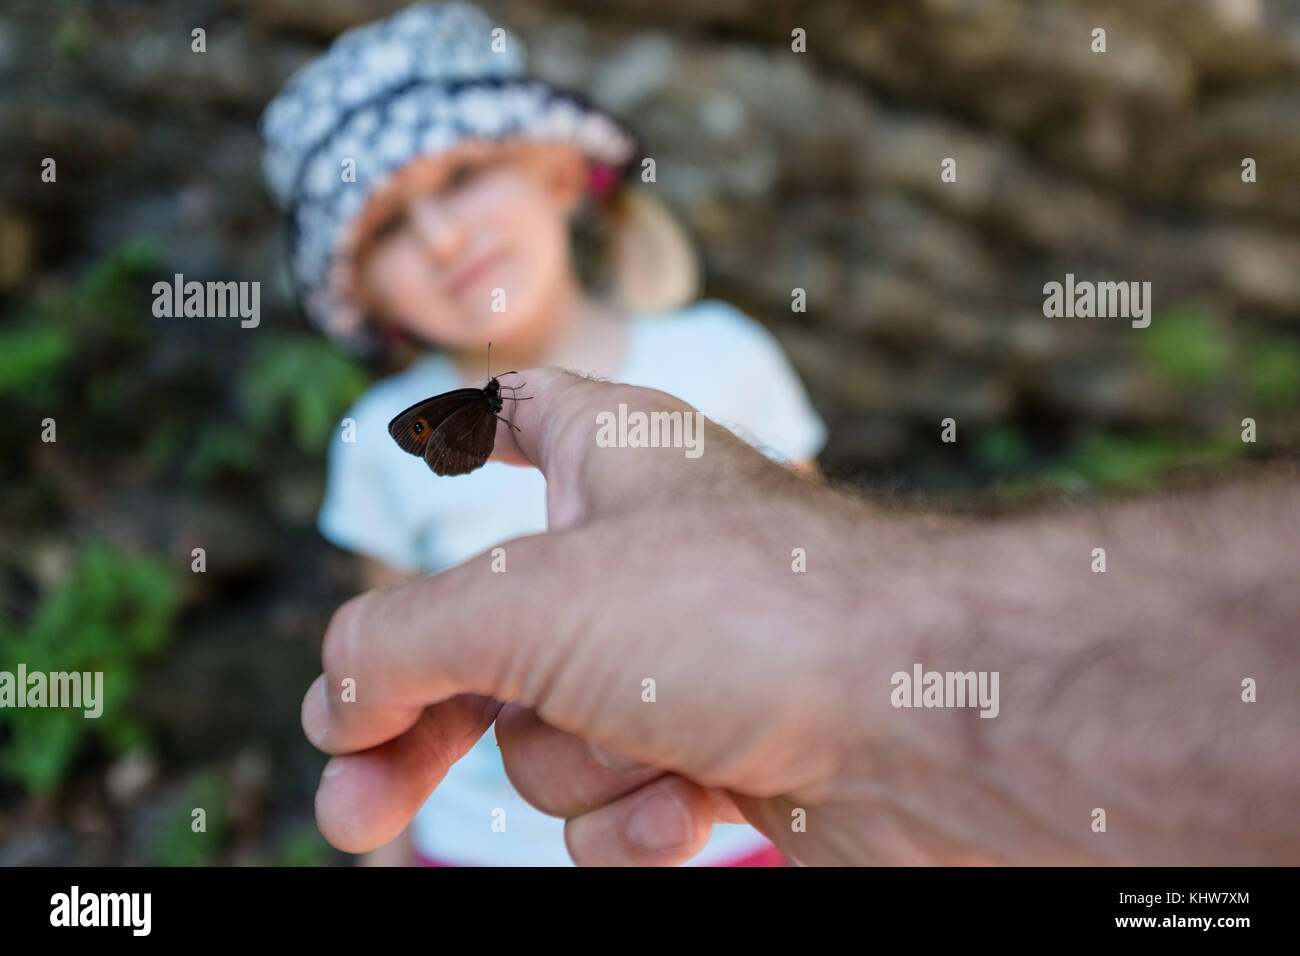 A 5yrs old girl watchnig a butterfly Stock Photo